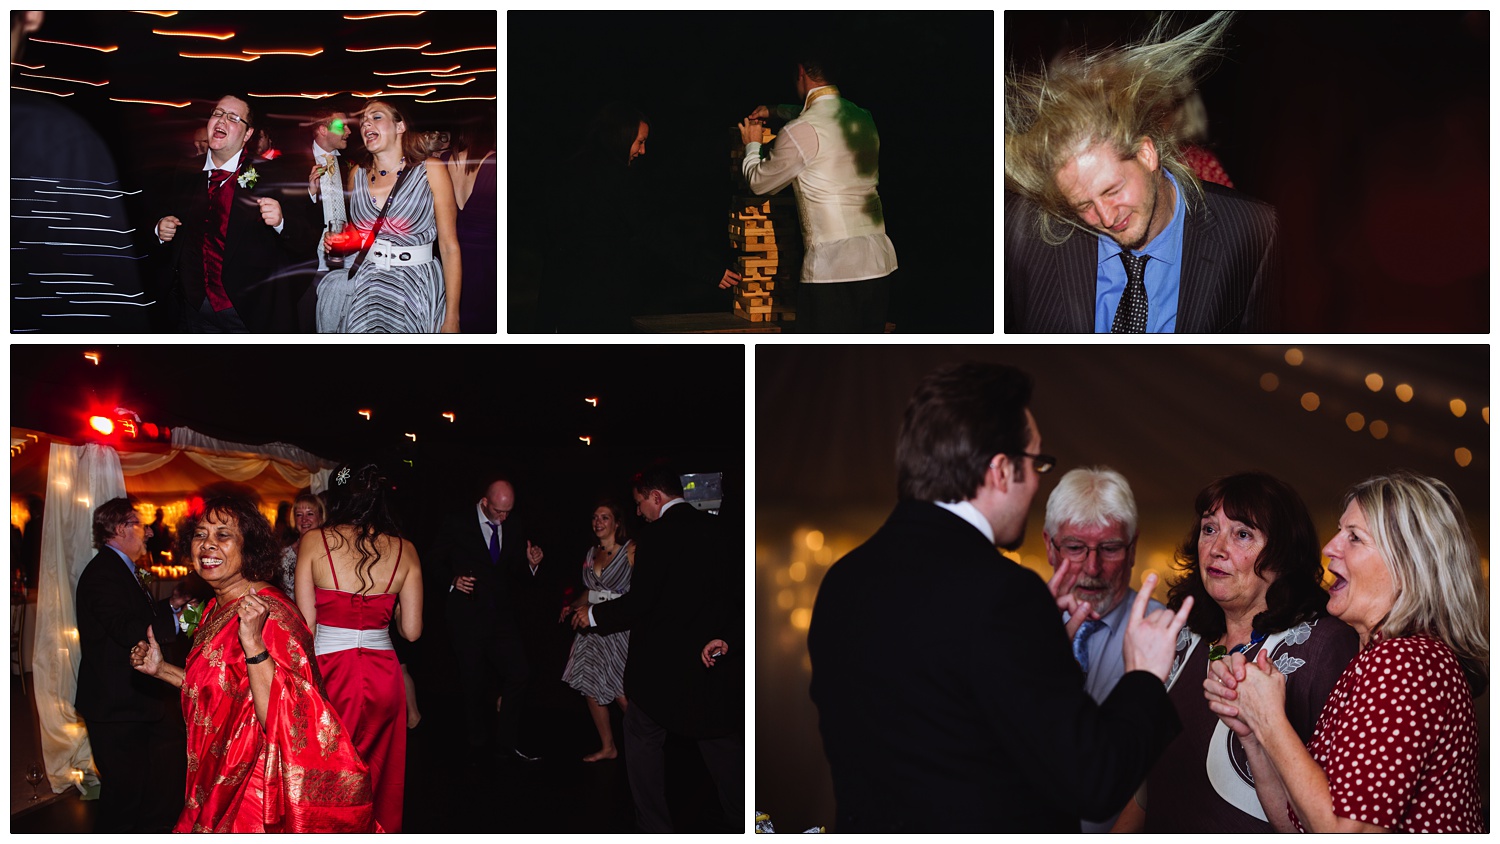 People dancing at a wedding reception.